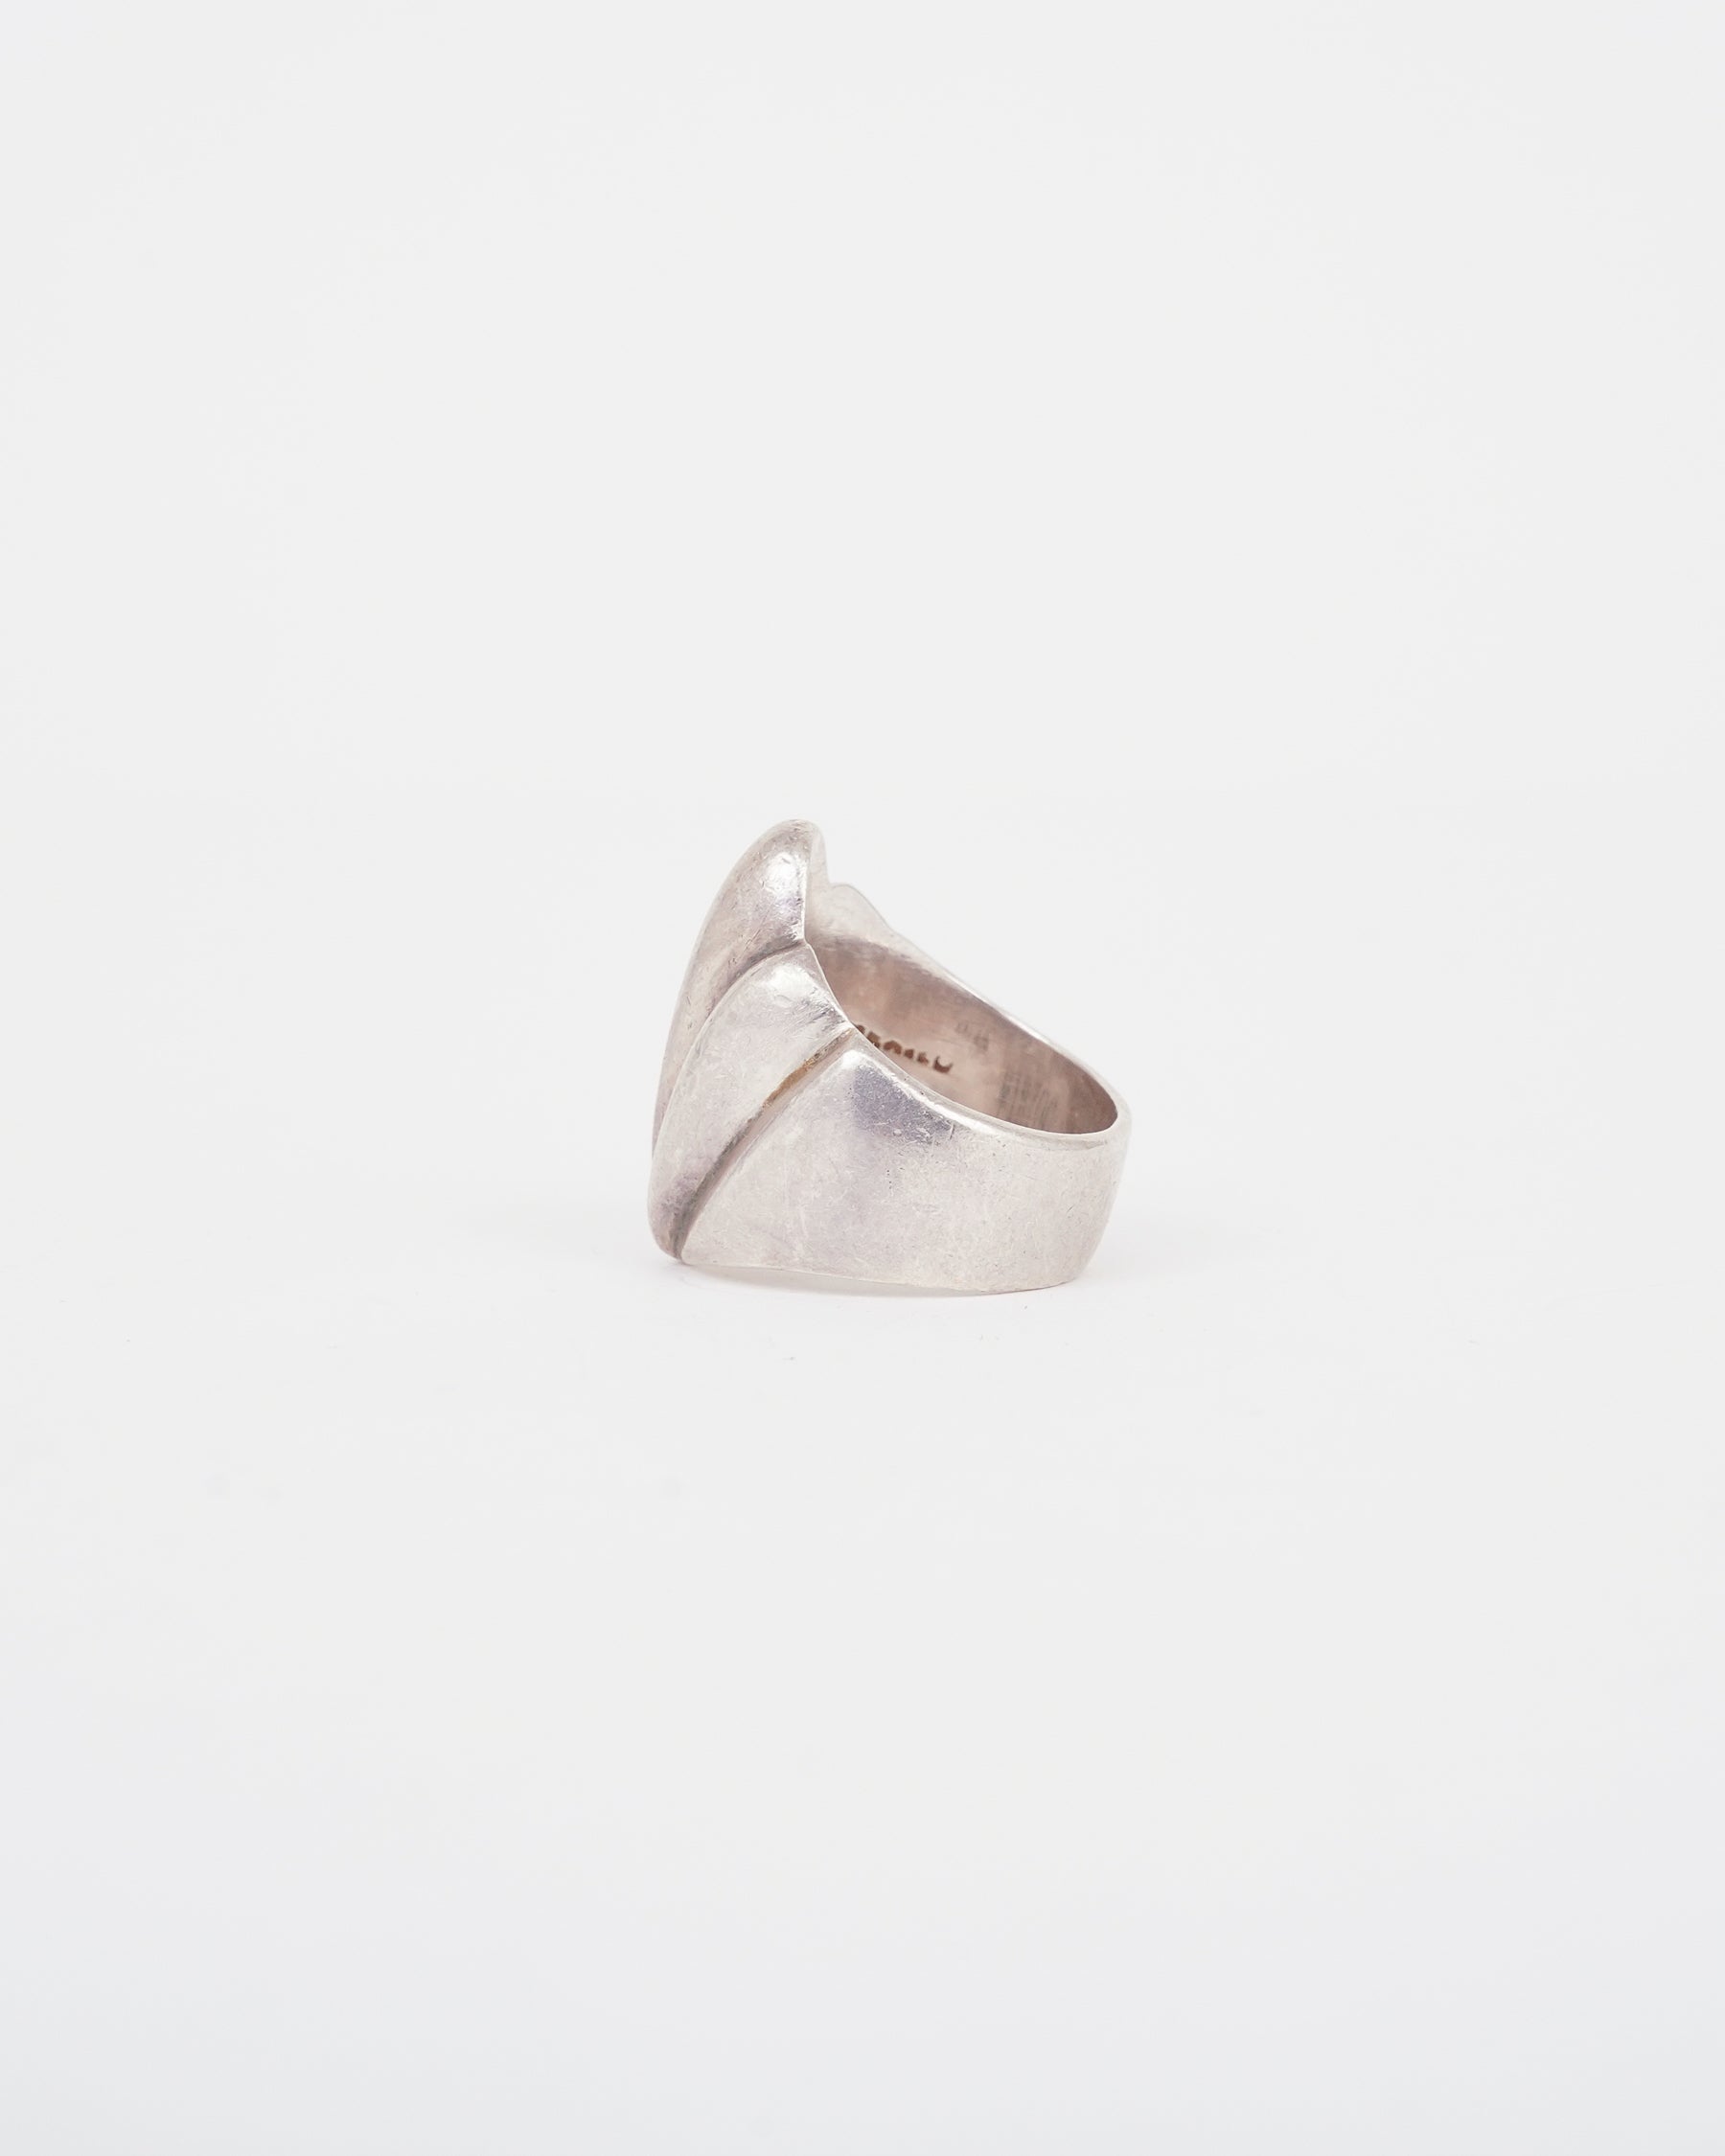 Silver Ring: Size13